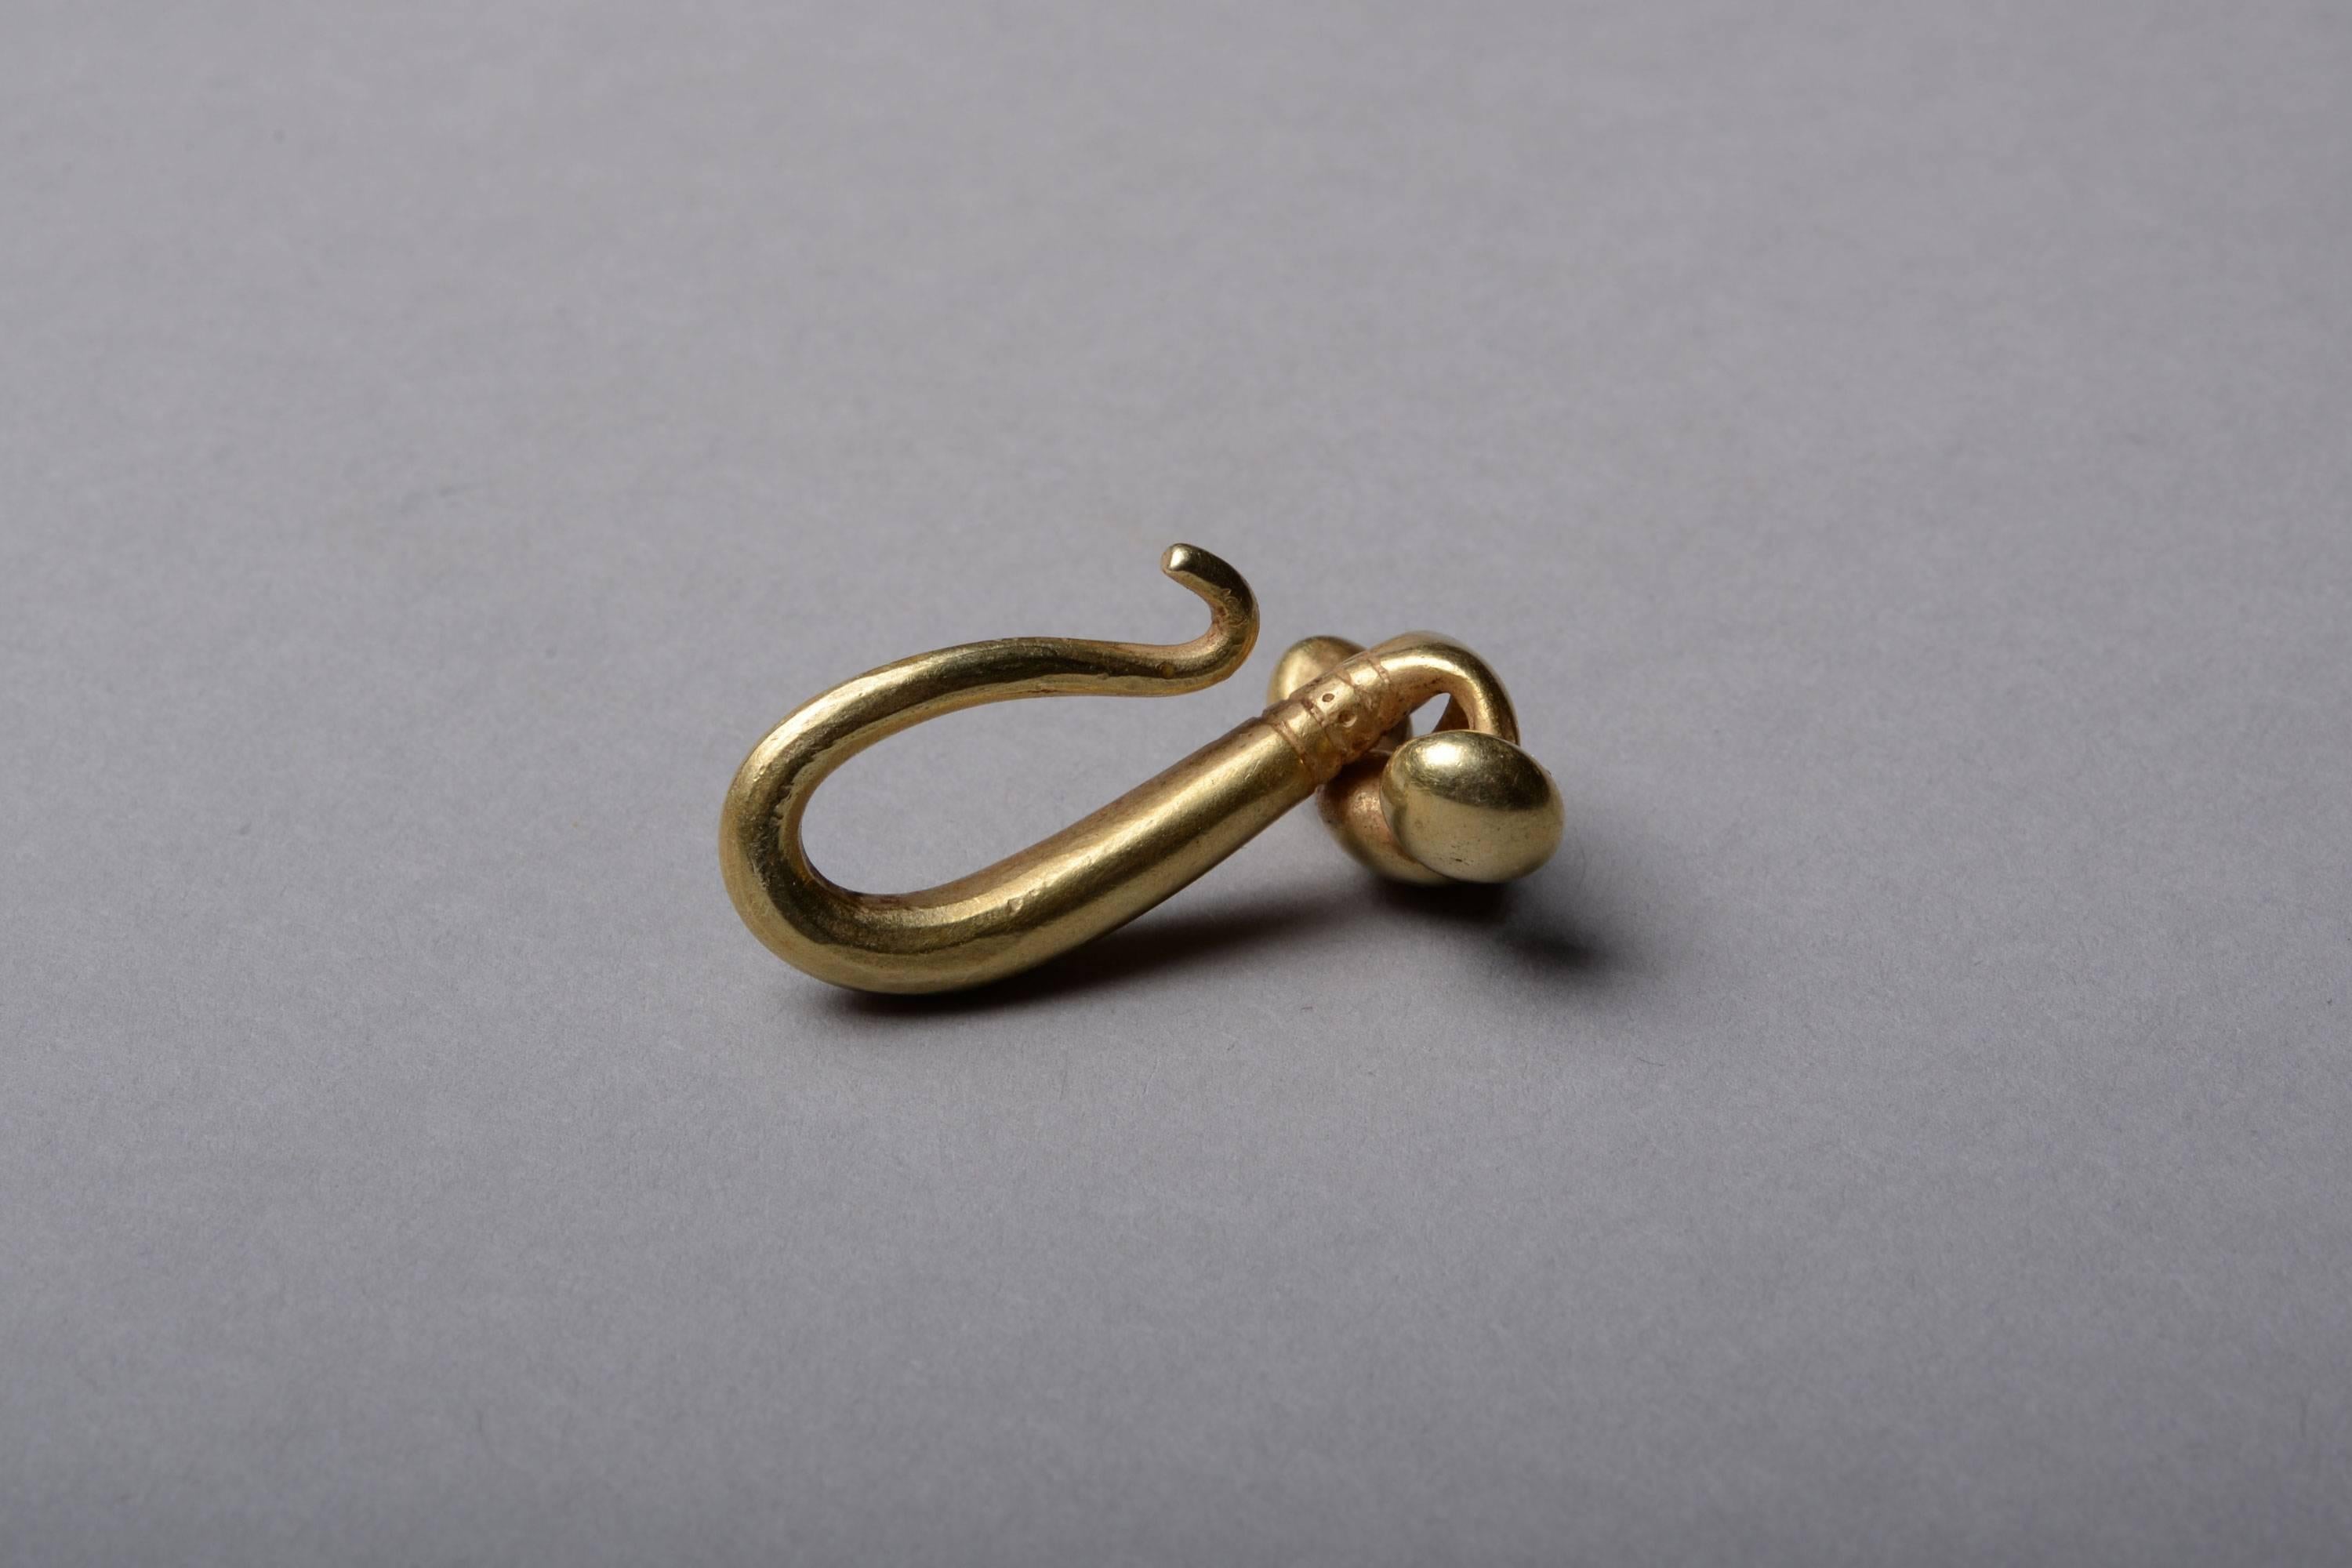 Ancient Greek Gold Dress Fastener Fibula Brooch - 550 BC In Excellent Condition For Sale In London, GB